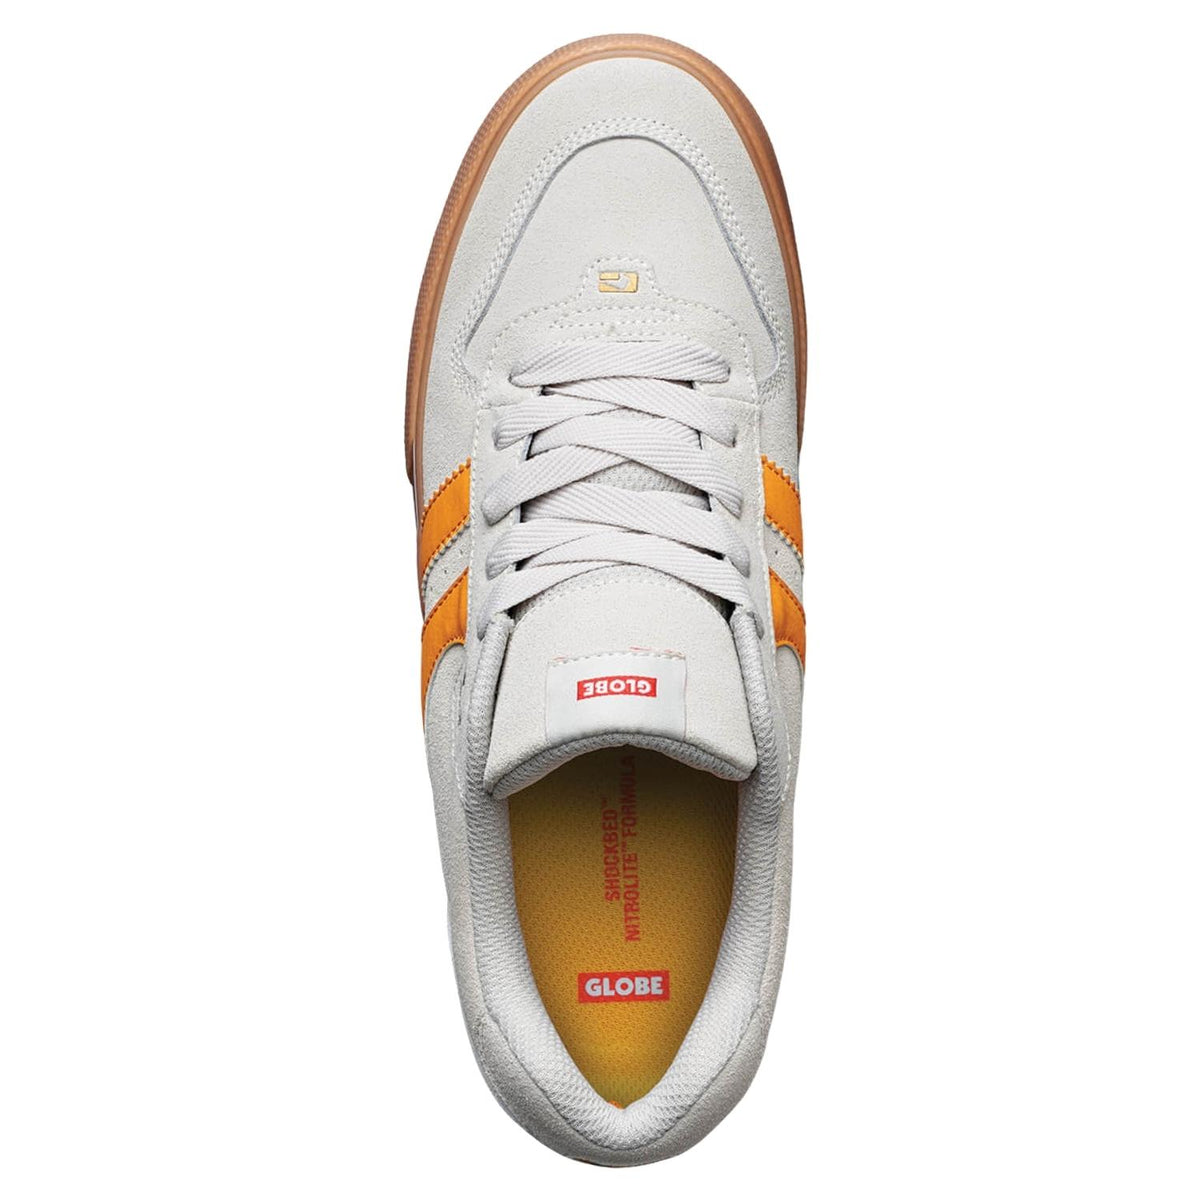 Globe Encore 2 Shoes - Birch/Yellow/Gum - Mens Casual Shoes by Globe